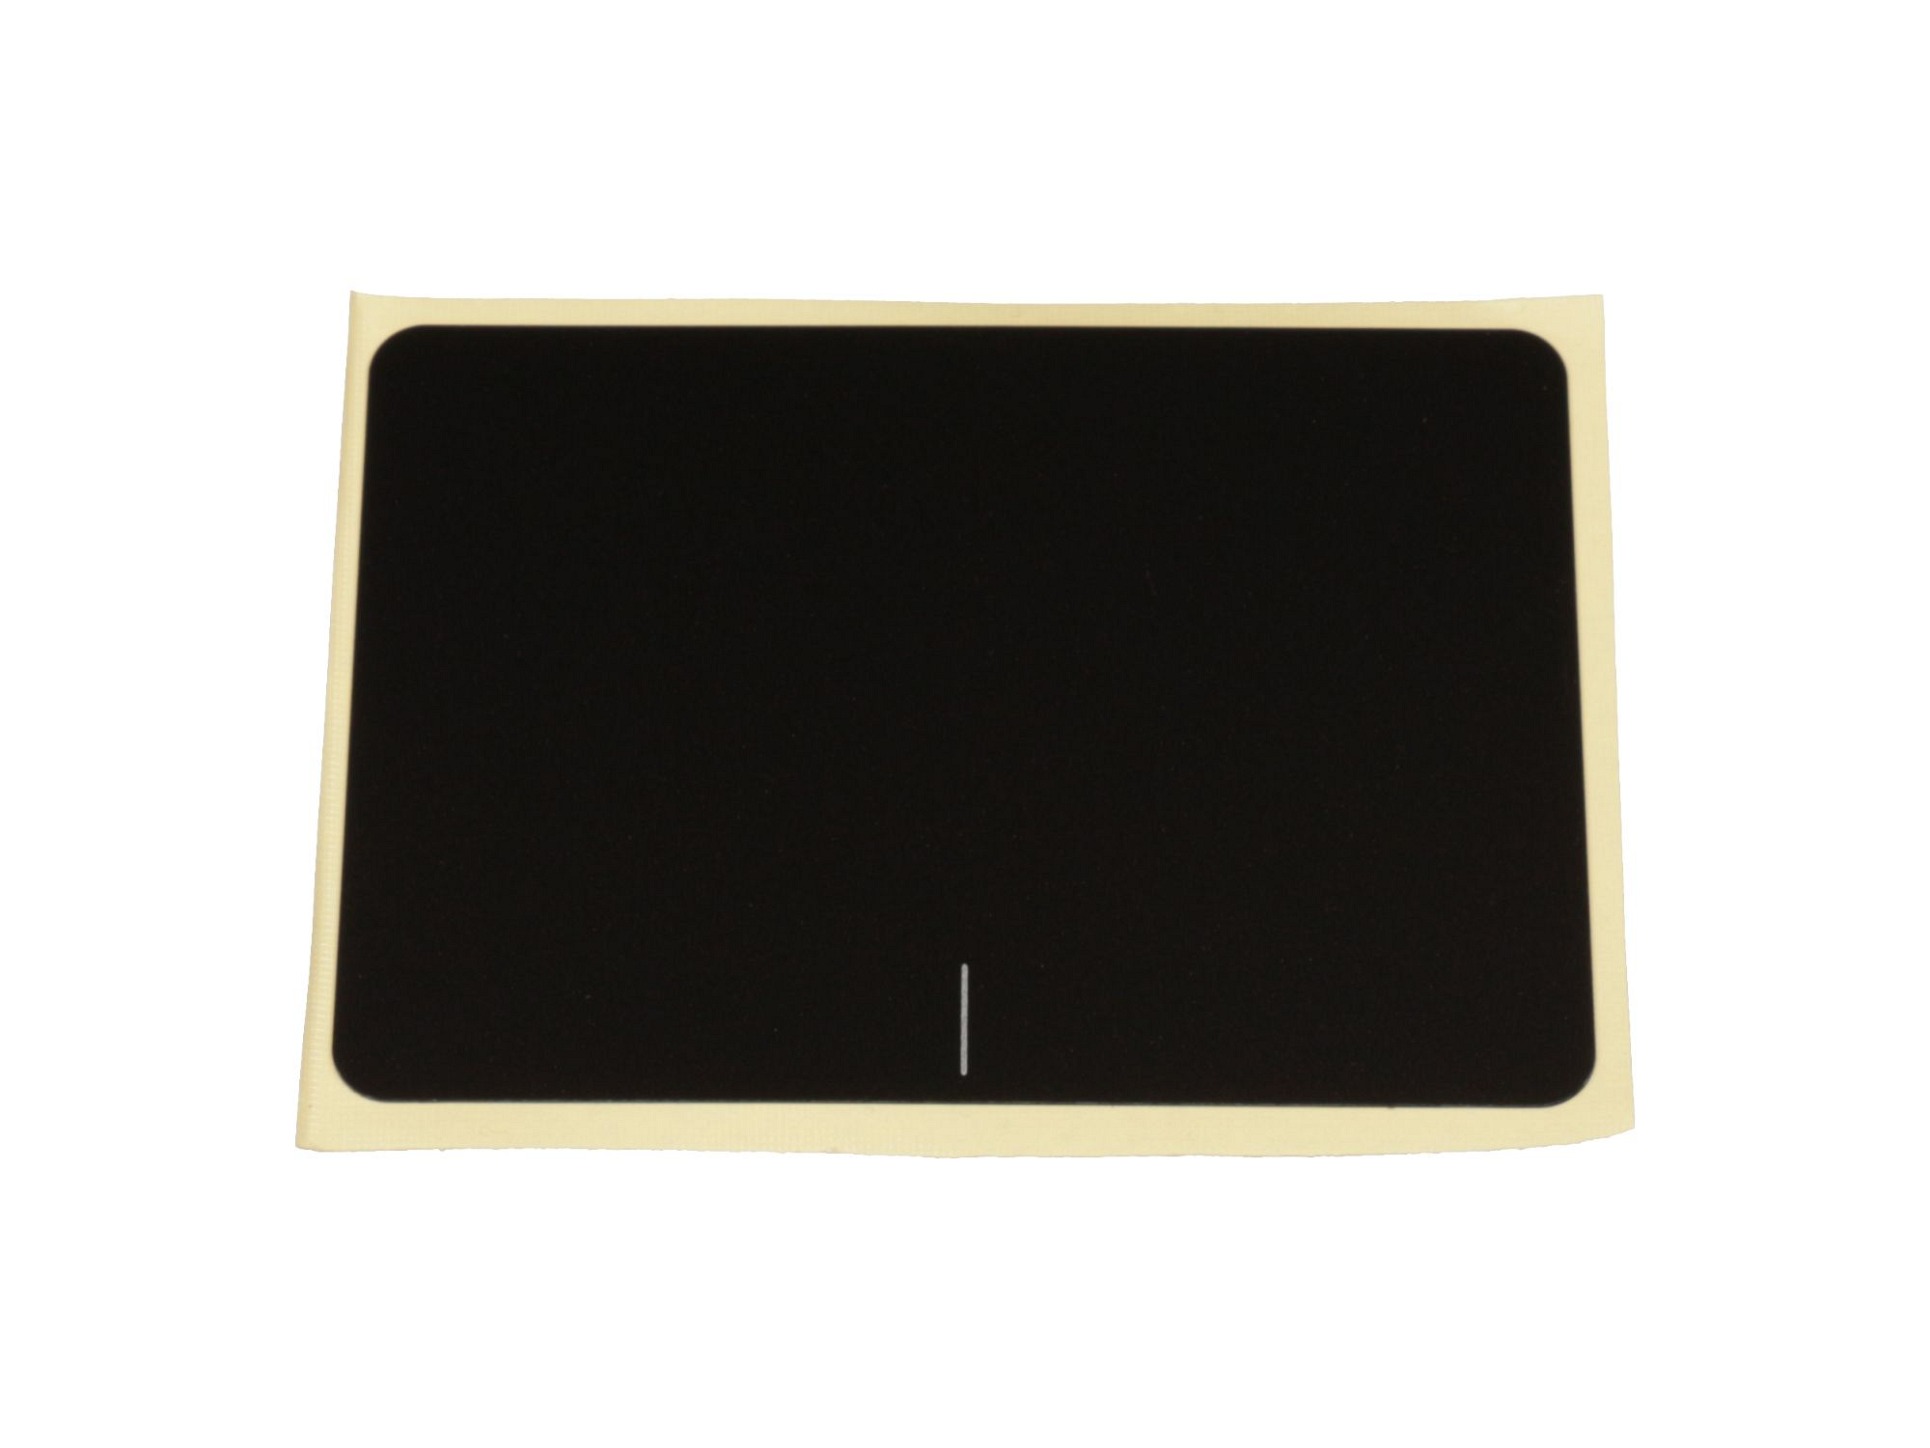 Touchpad-Cover für Asus R753UA